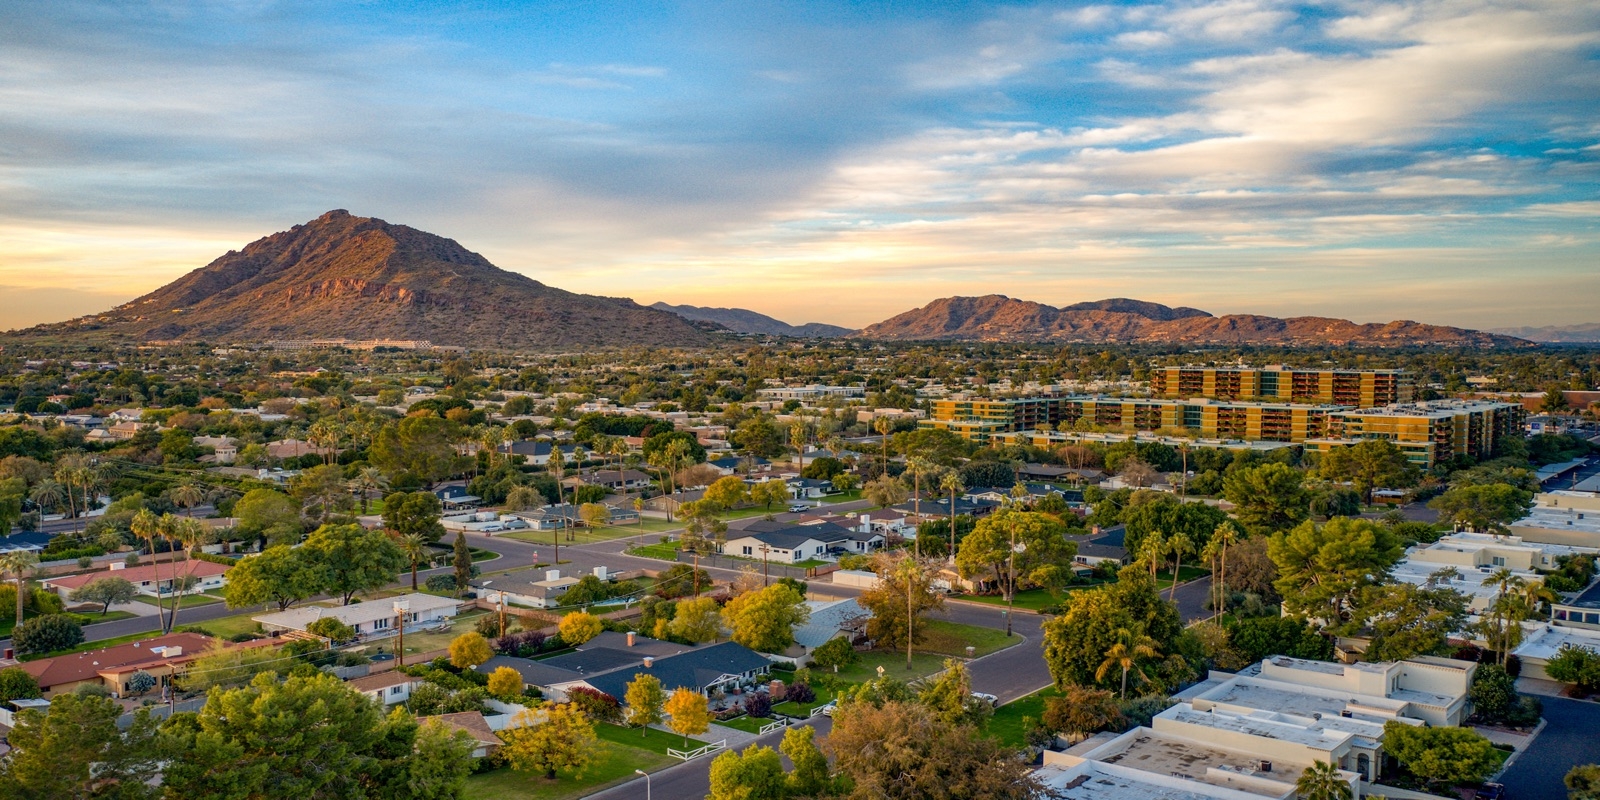 Featured image of Scottsdale